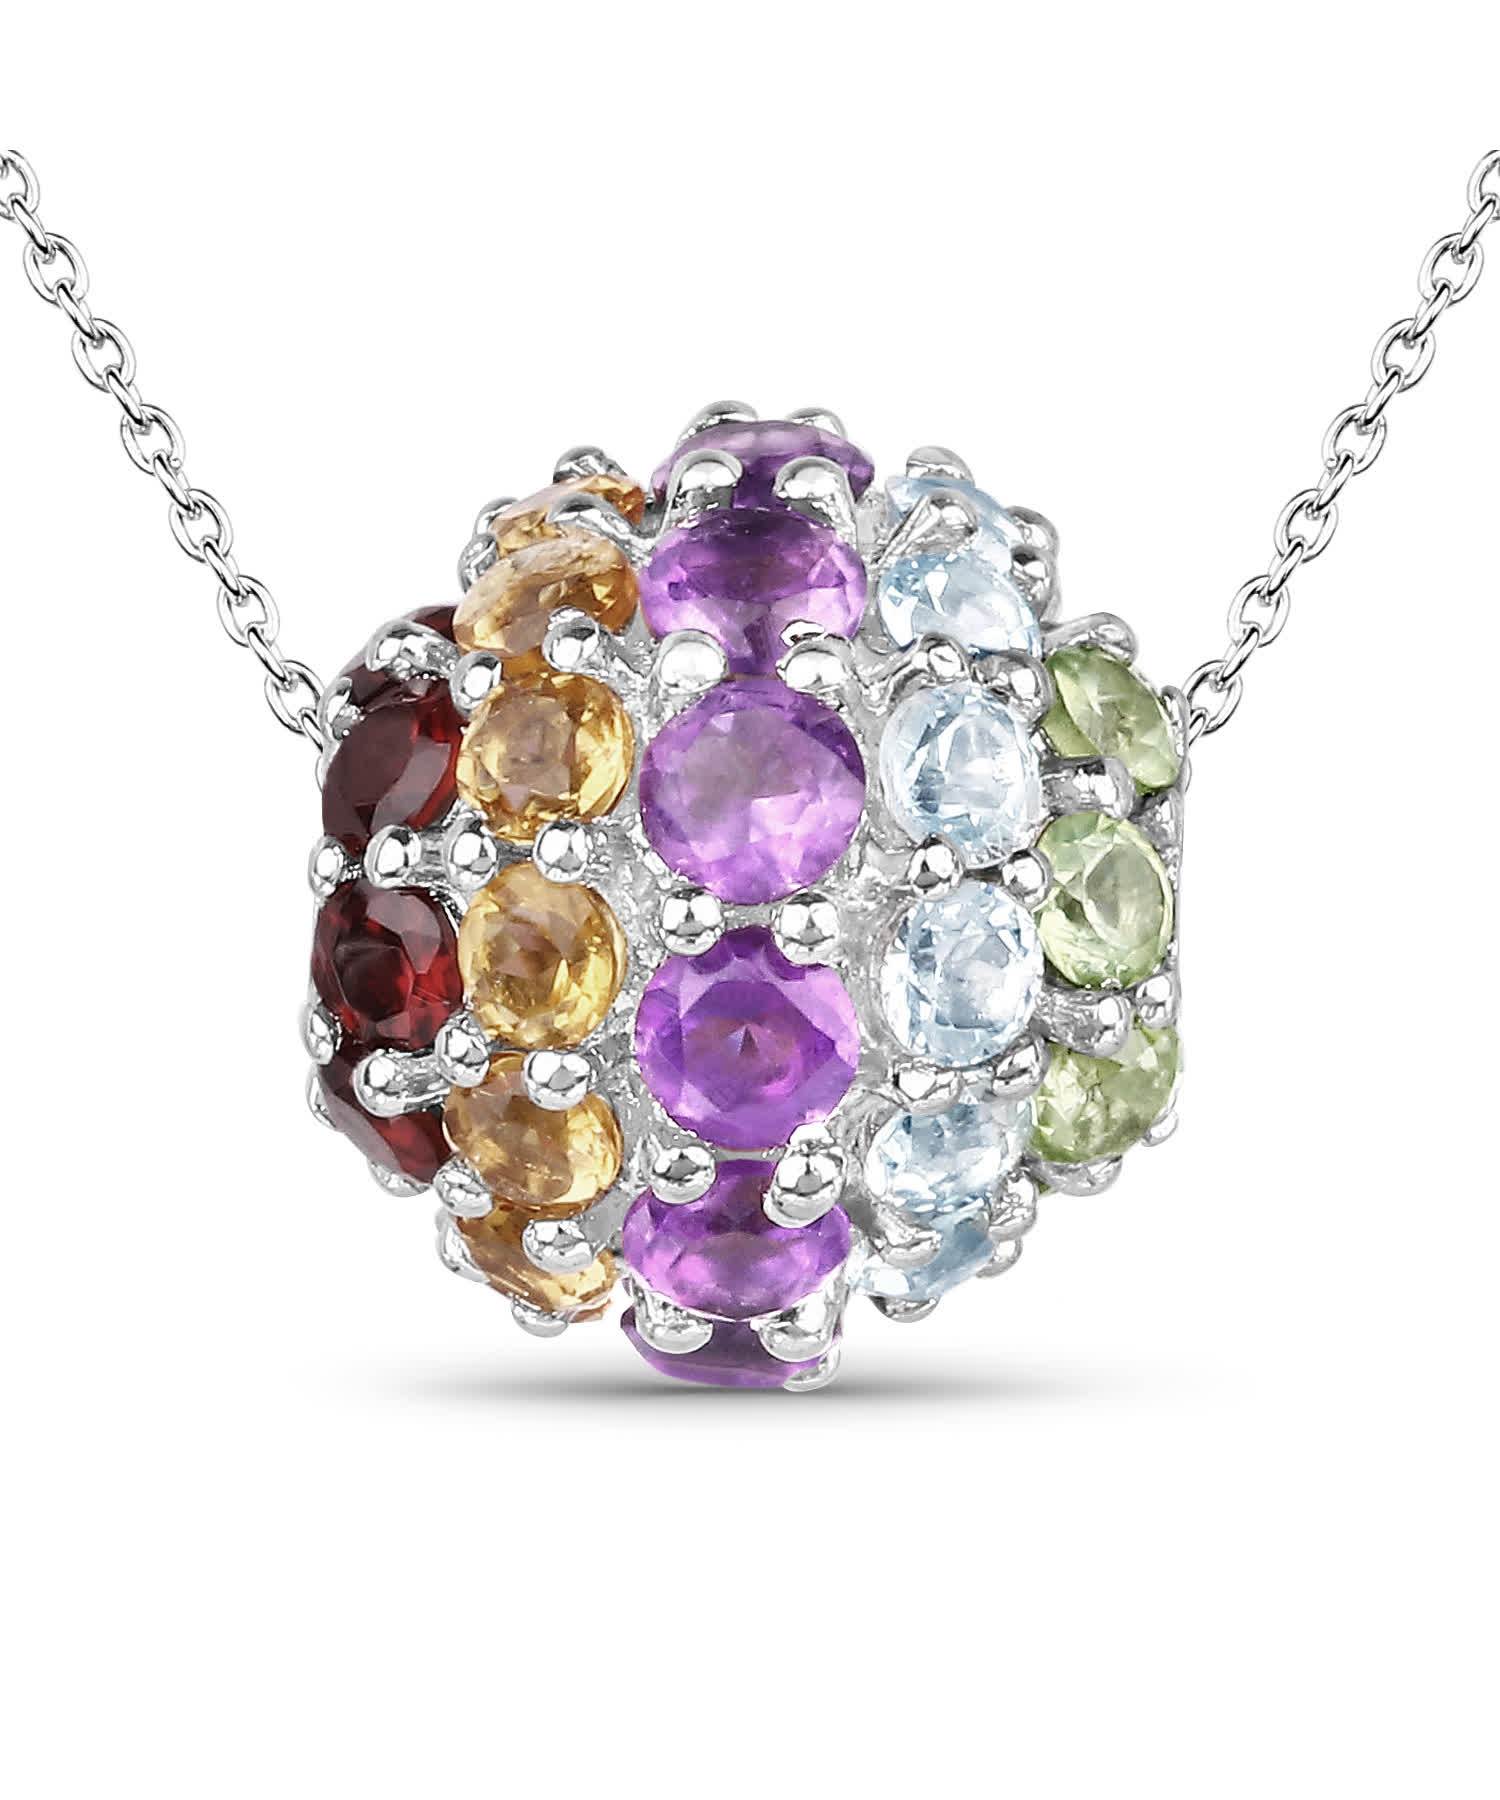 3.95ctw Natural Multi-Color Mixed Gems Rhodium Plated 925 Sterling Silver Pendant With Chain View 1